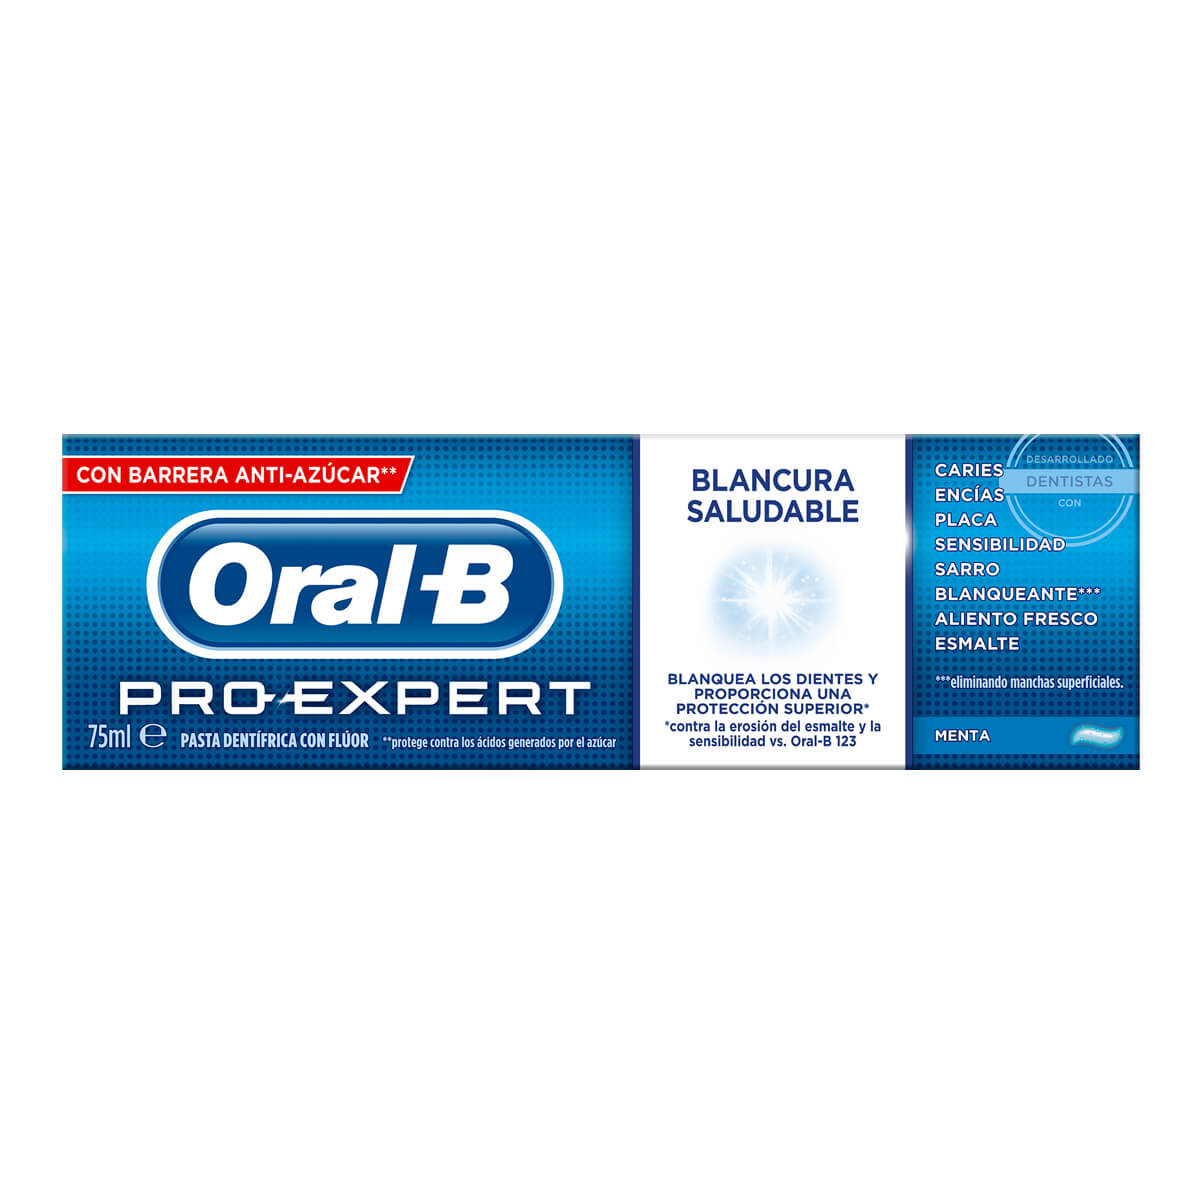 Oral-B Pro-Expert Blancura Saludable undefined